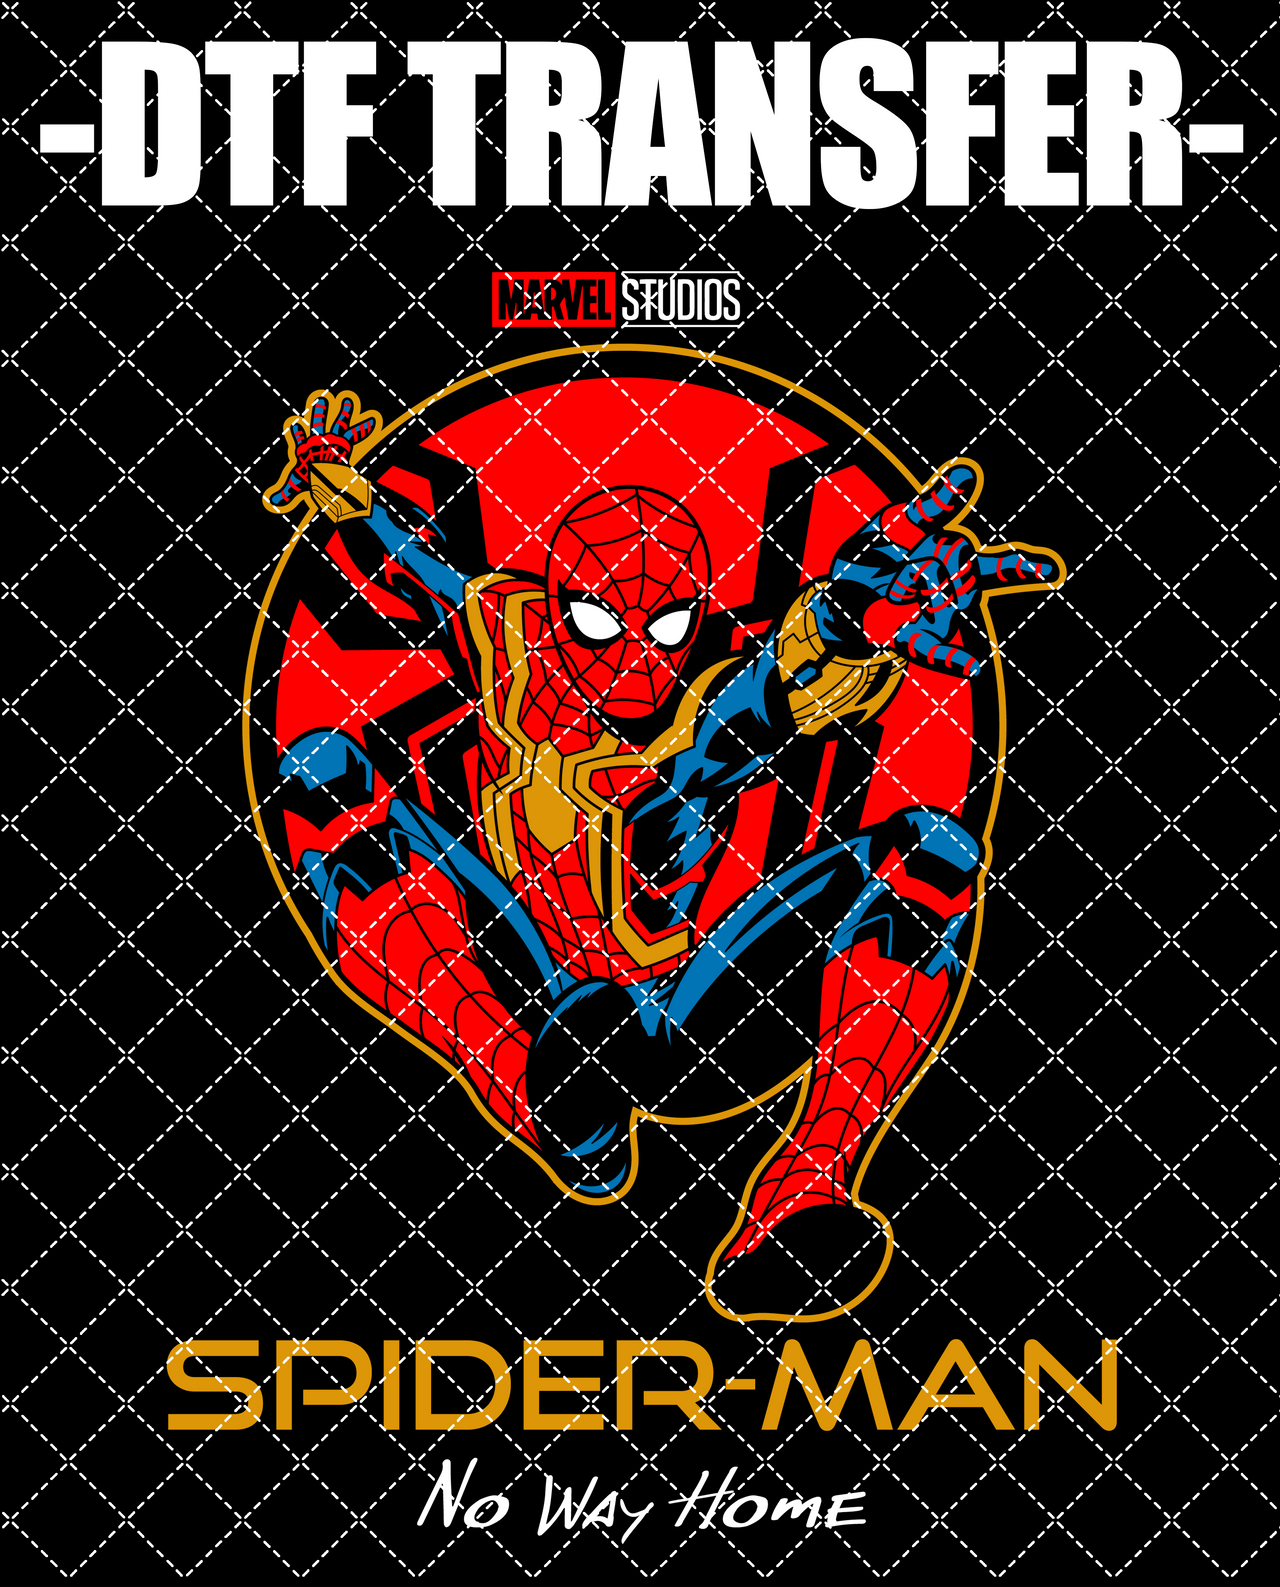 Spiderman No Way Home (For Black Tee) - DTF Transfer (Ready To Press)